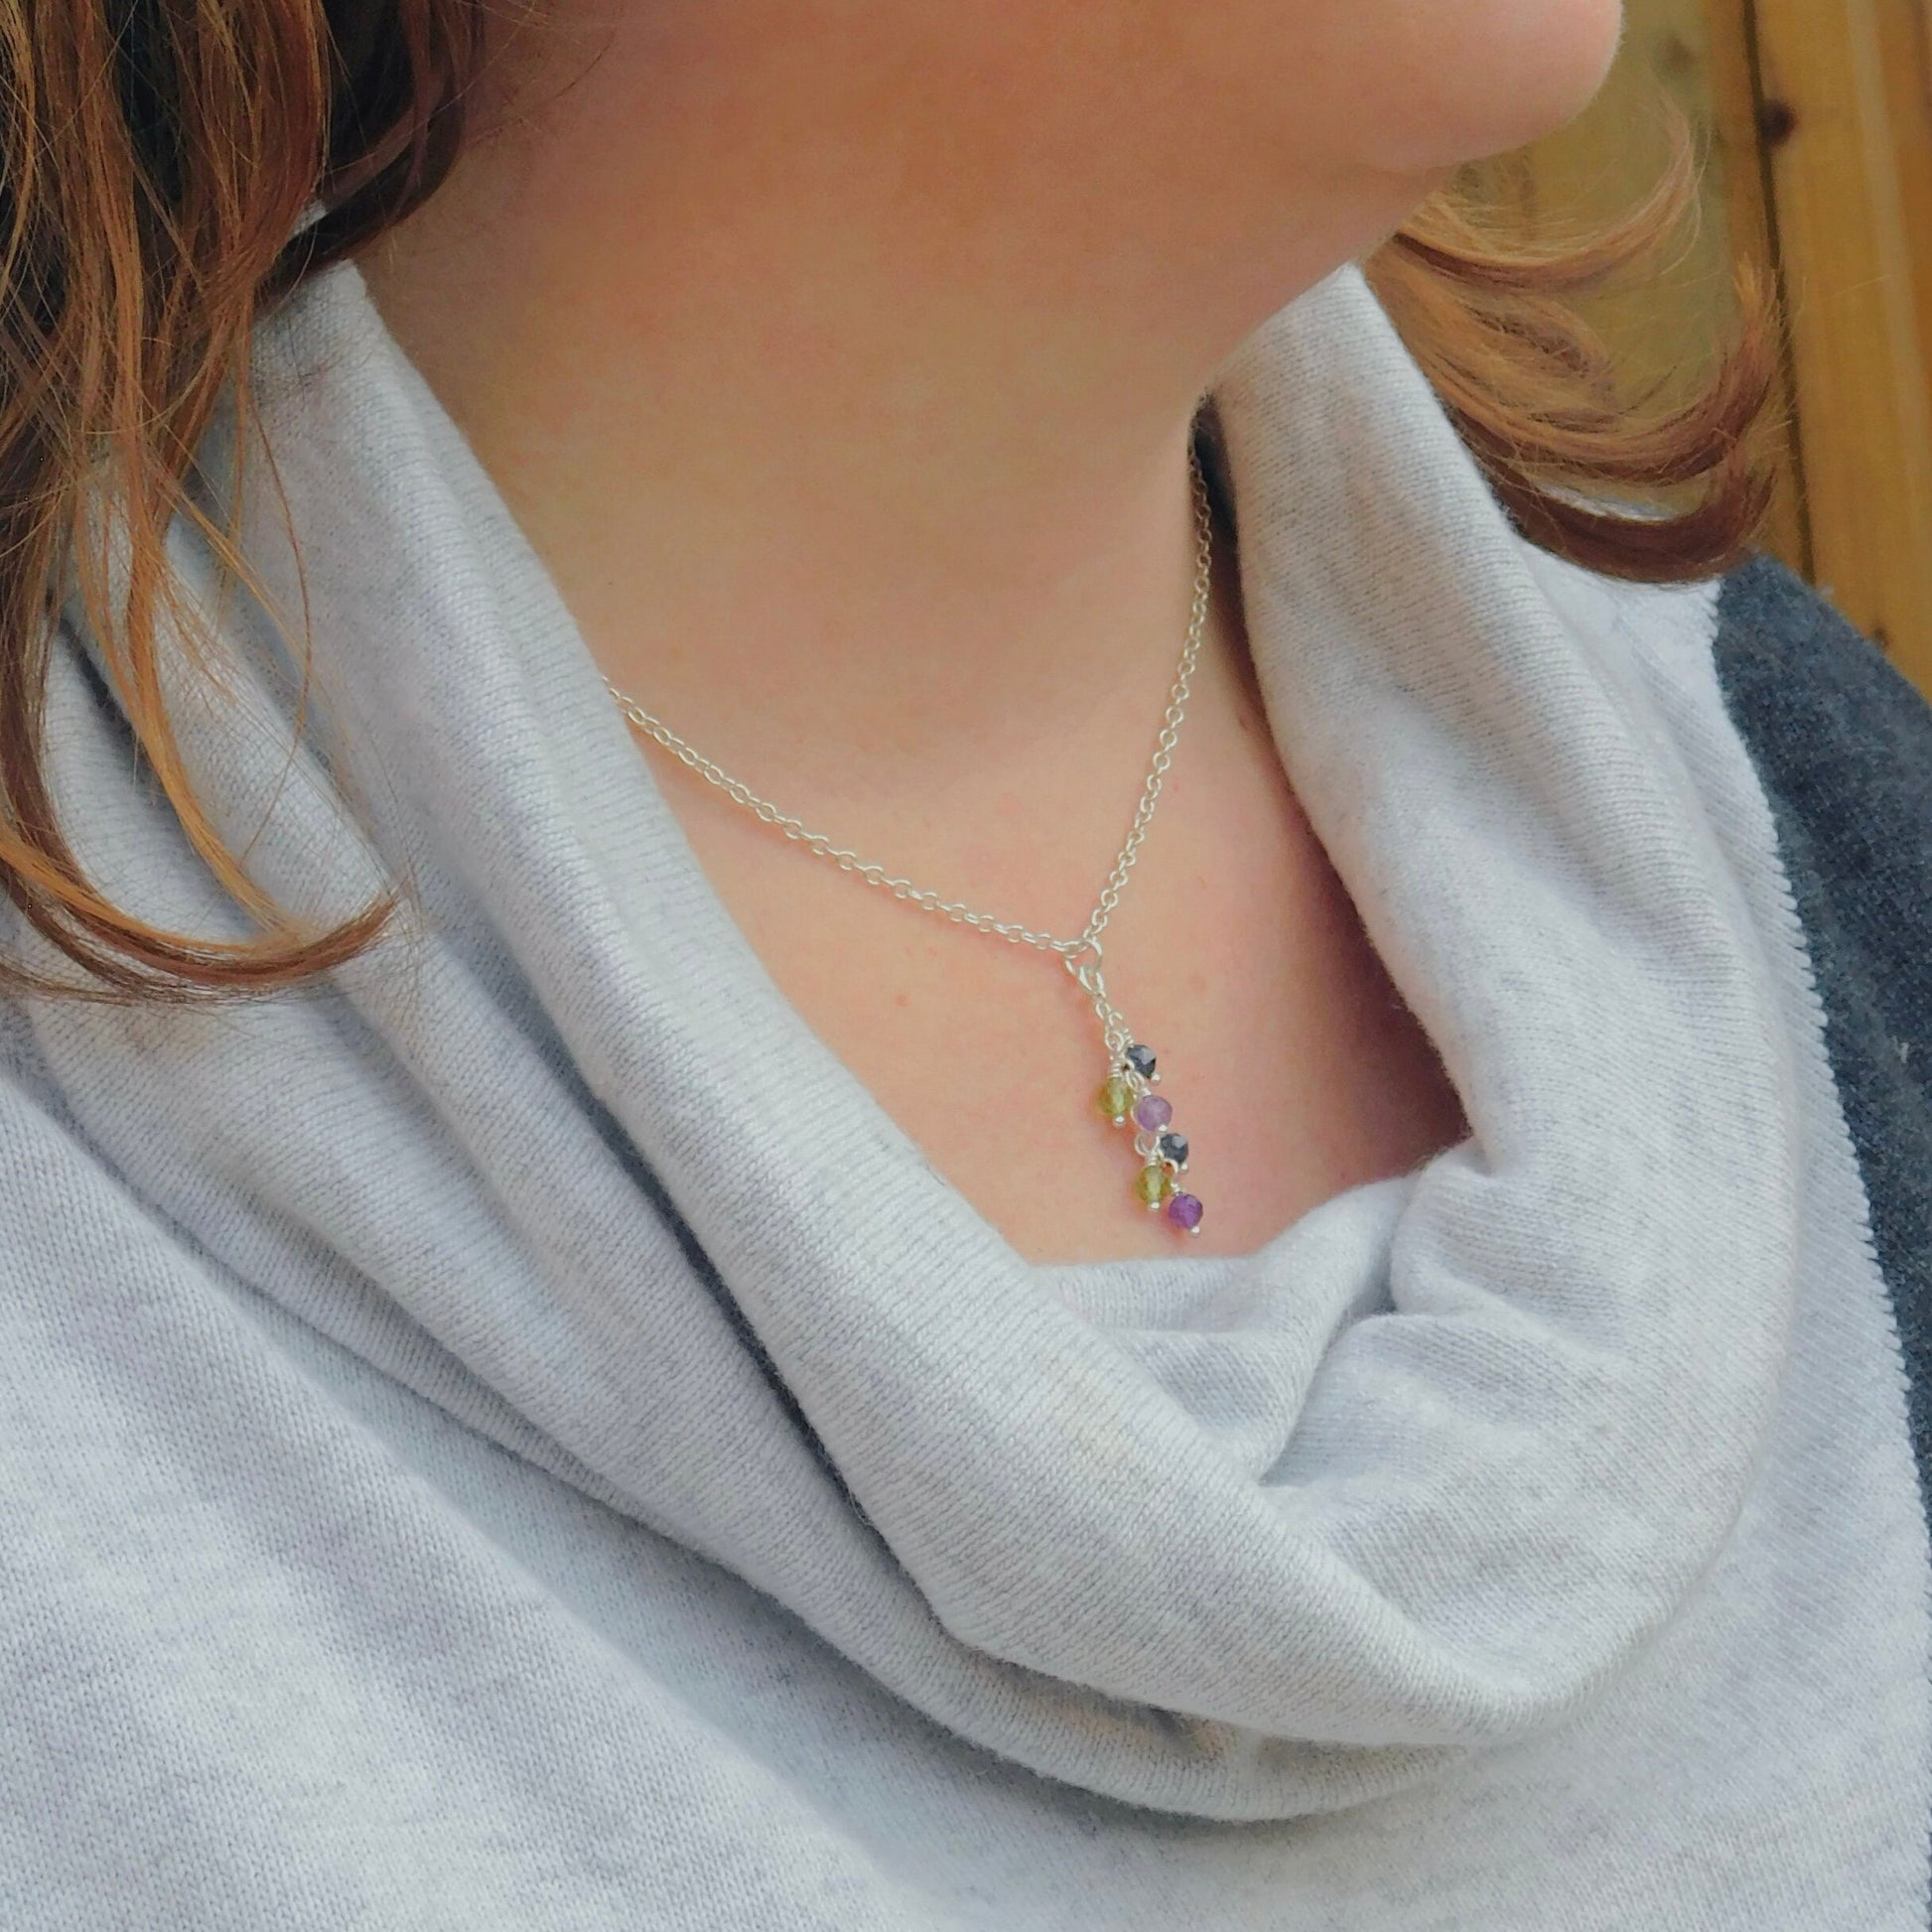 Dainty Family Birthstone Cascade Necklace, Family Jewellery for Mum in Sterling Silver